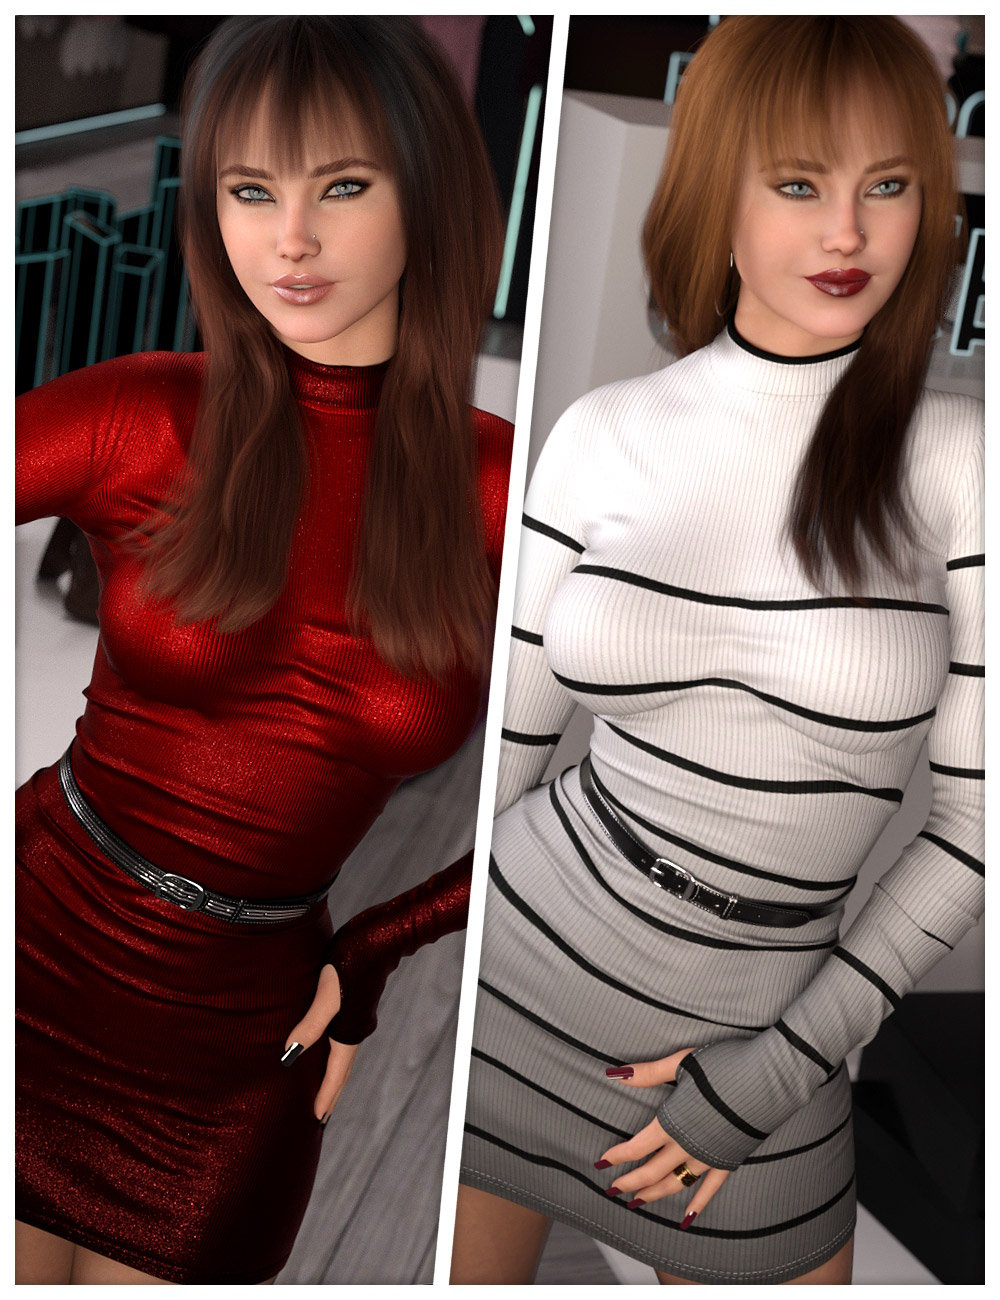 Opportune Textures for dForce SU High Collar Dress by: ShanasSoulmate, 3D Models by Daz 3D